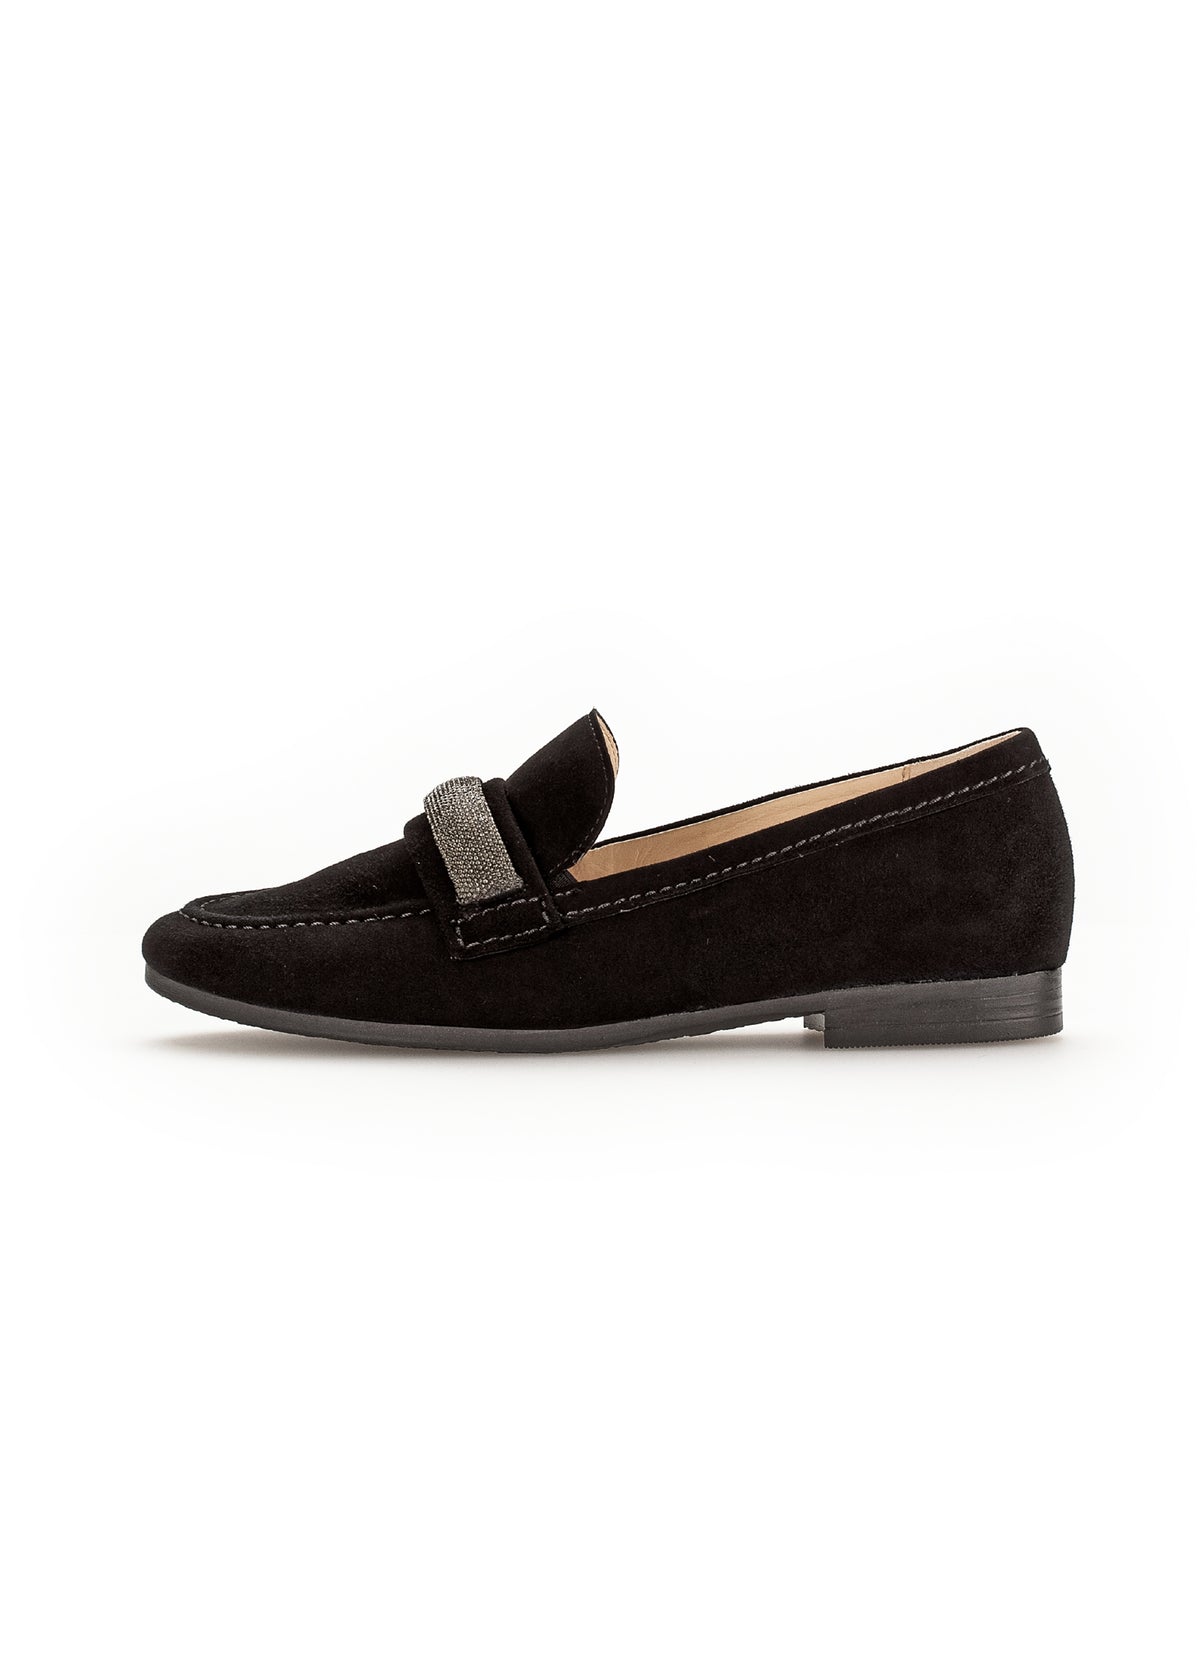 Loafers with a silver strap - black nubuck leather